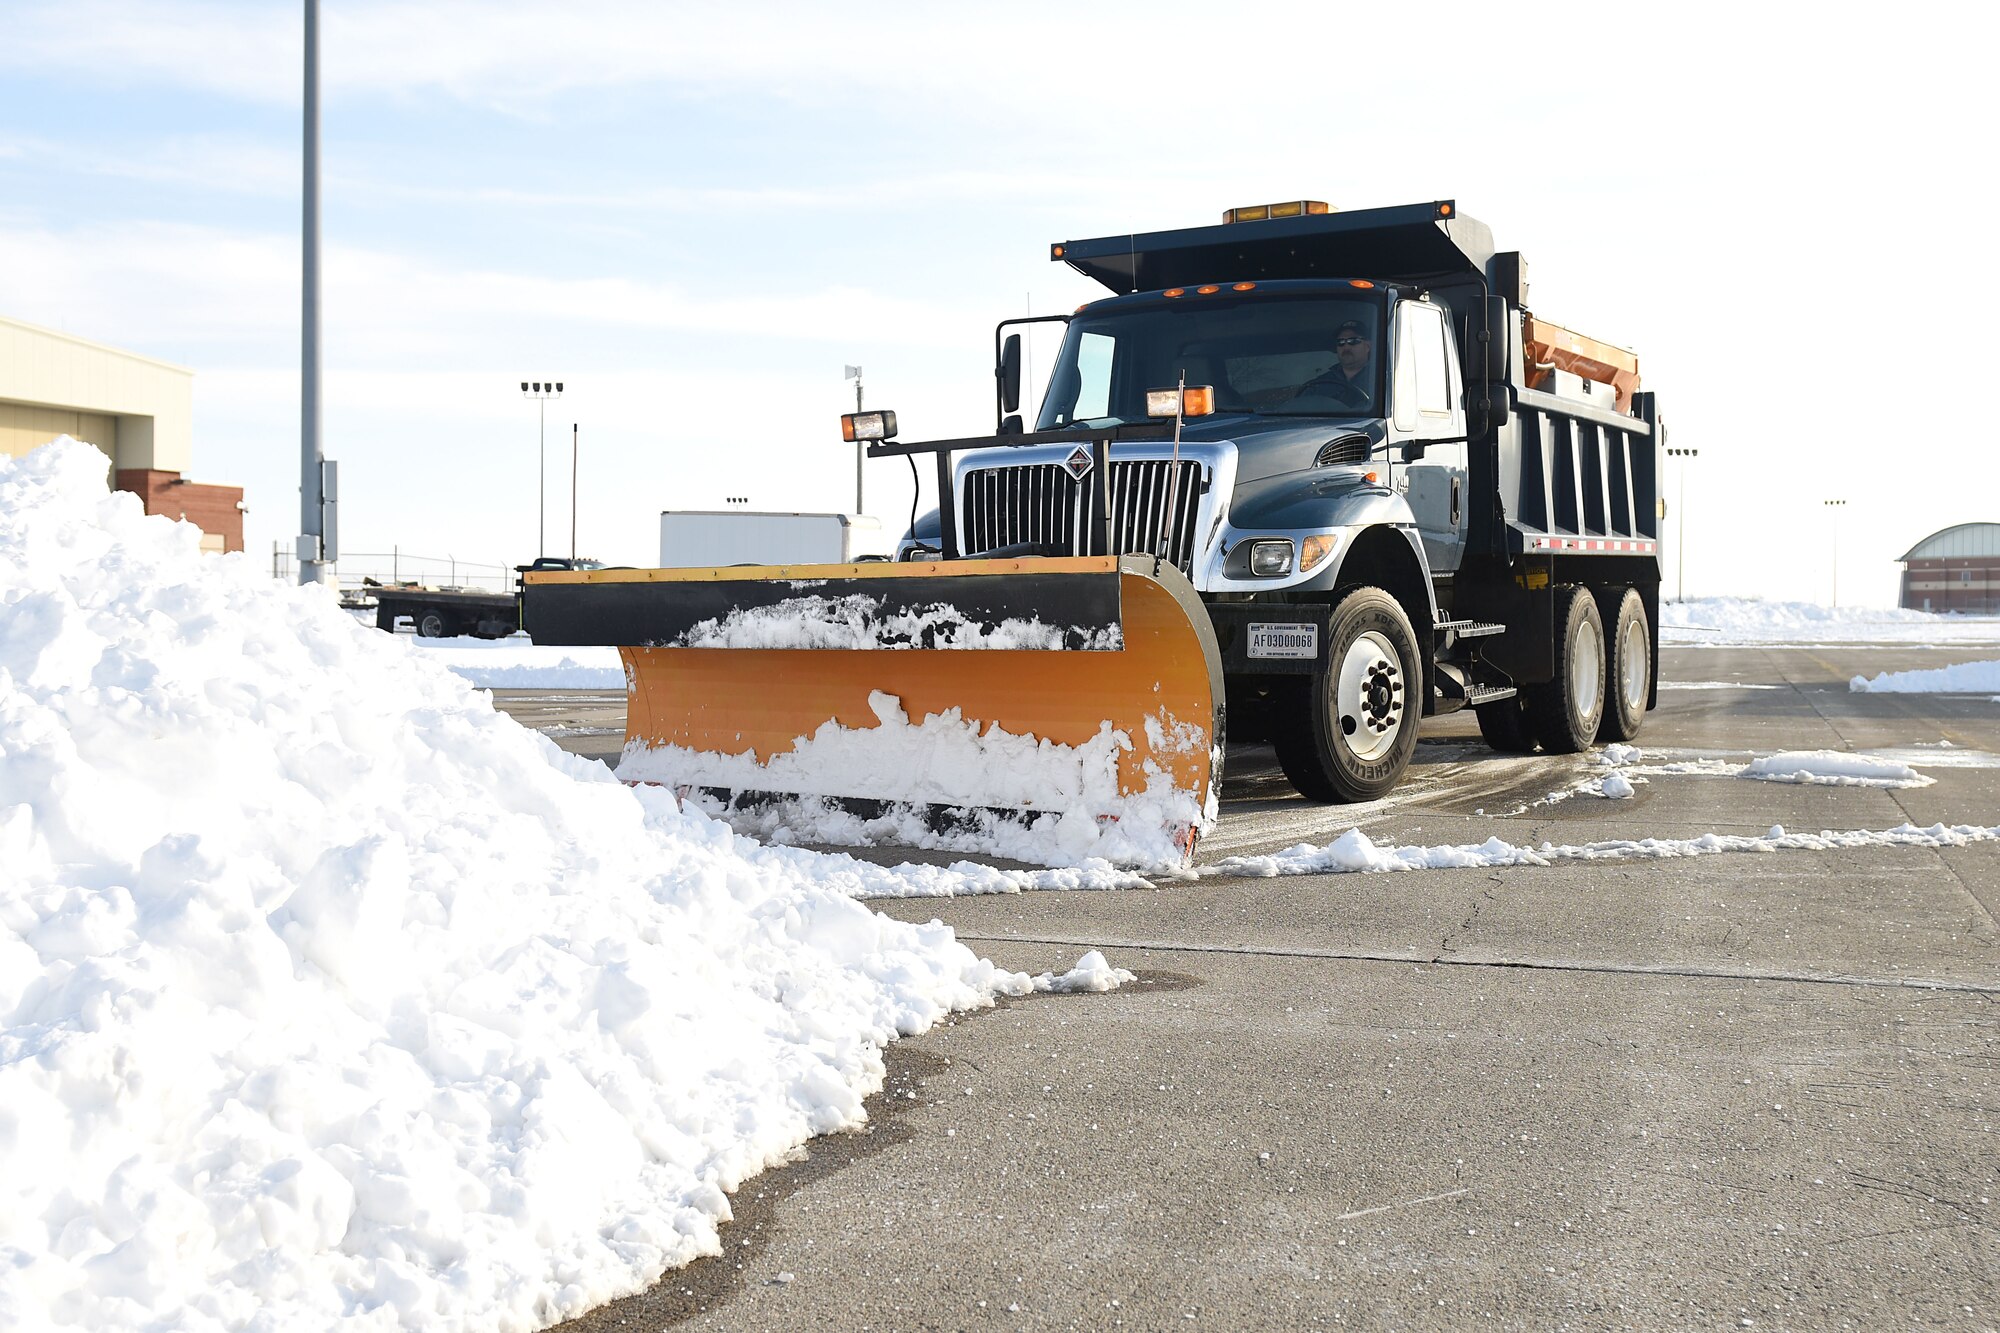 James Dutenhaver, a state employee assigned to the 178th Civil Engineering Squadron, plows snow Feb. 8 at Springfield Air National Guard in Springfield, Ohio. Dutenhaver has worked in the 178th CES for 16 years.